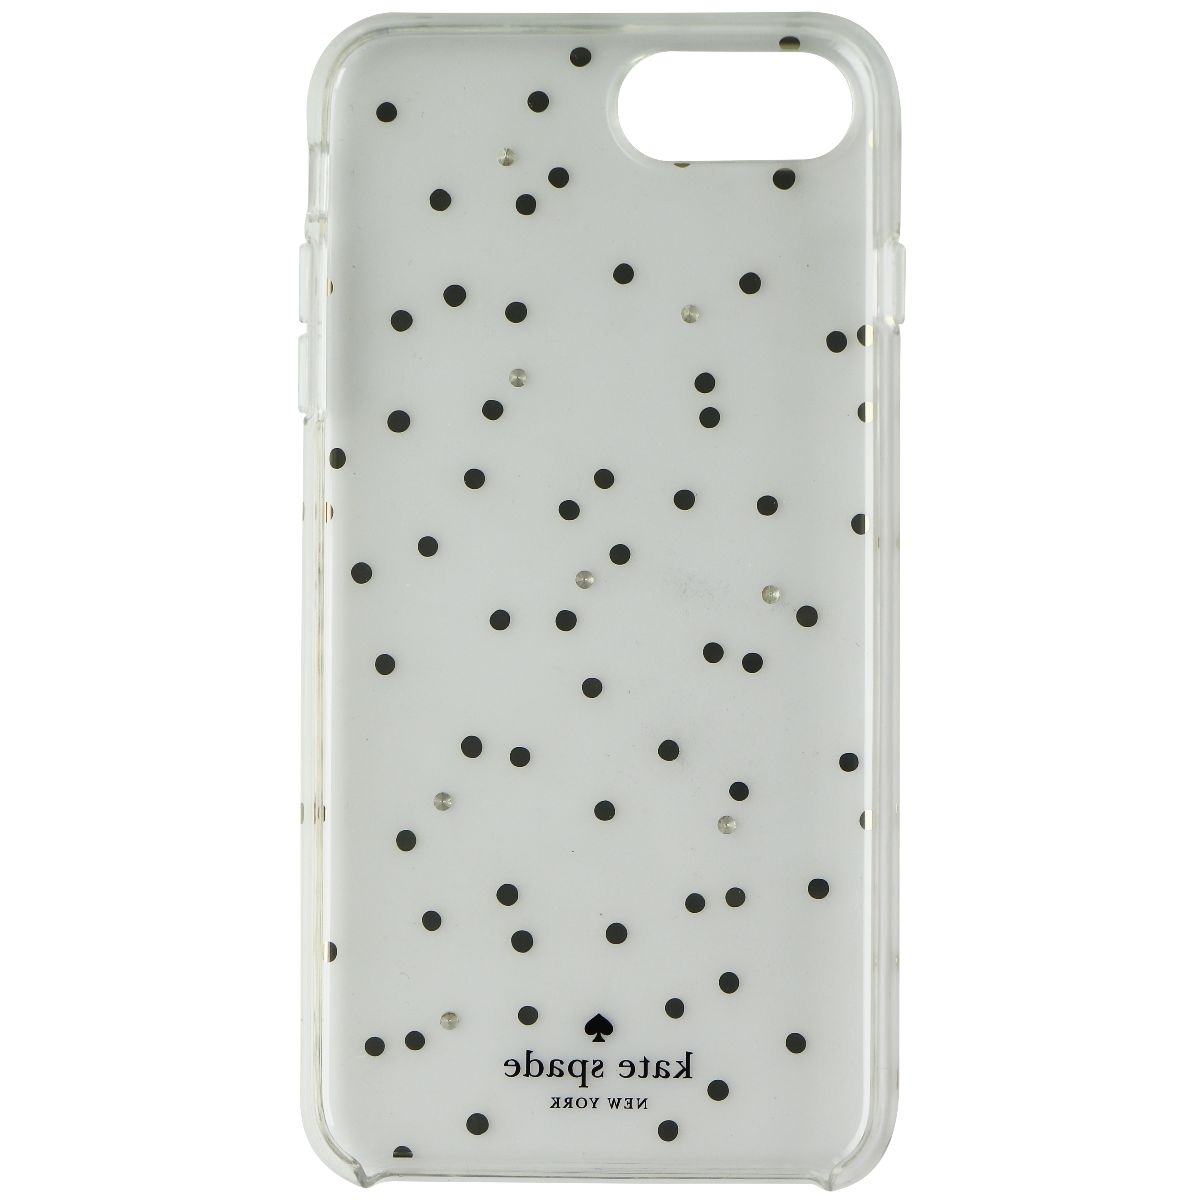 Kate Spade Protective Hardshell Case For IPhone 8 Plus/7 Plus - Gold Dots/Clear (Refurbished)